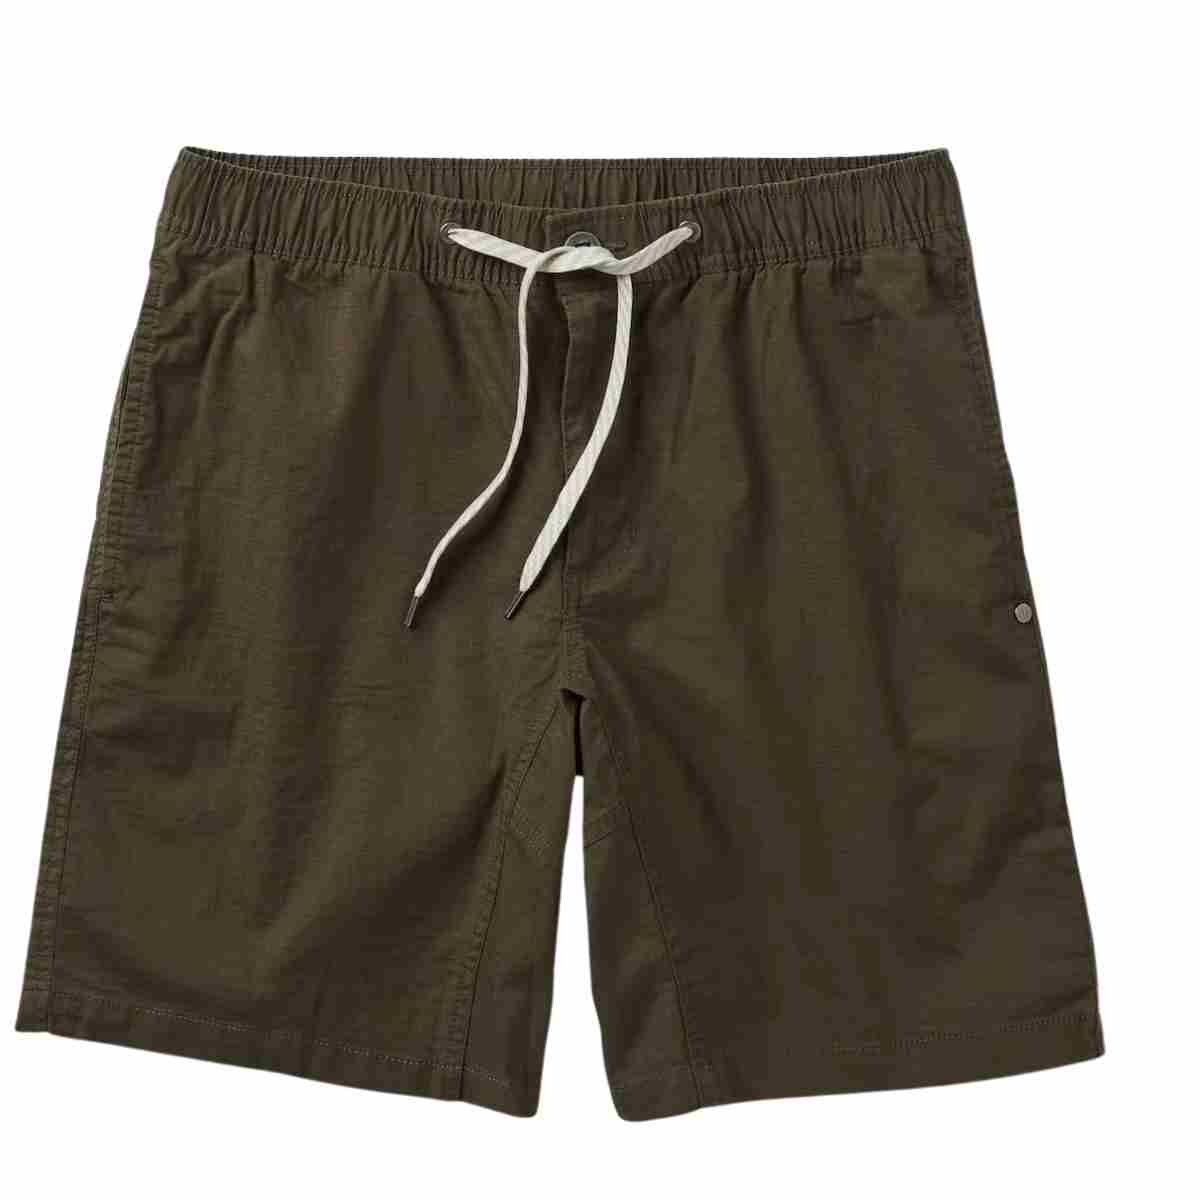 CARWORNIC Mens Outdoor Hiking Shorts Quick Dry Lightweight Stretch Mountain Casual Cargo Shorts 